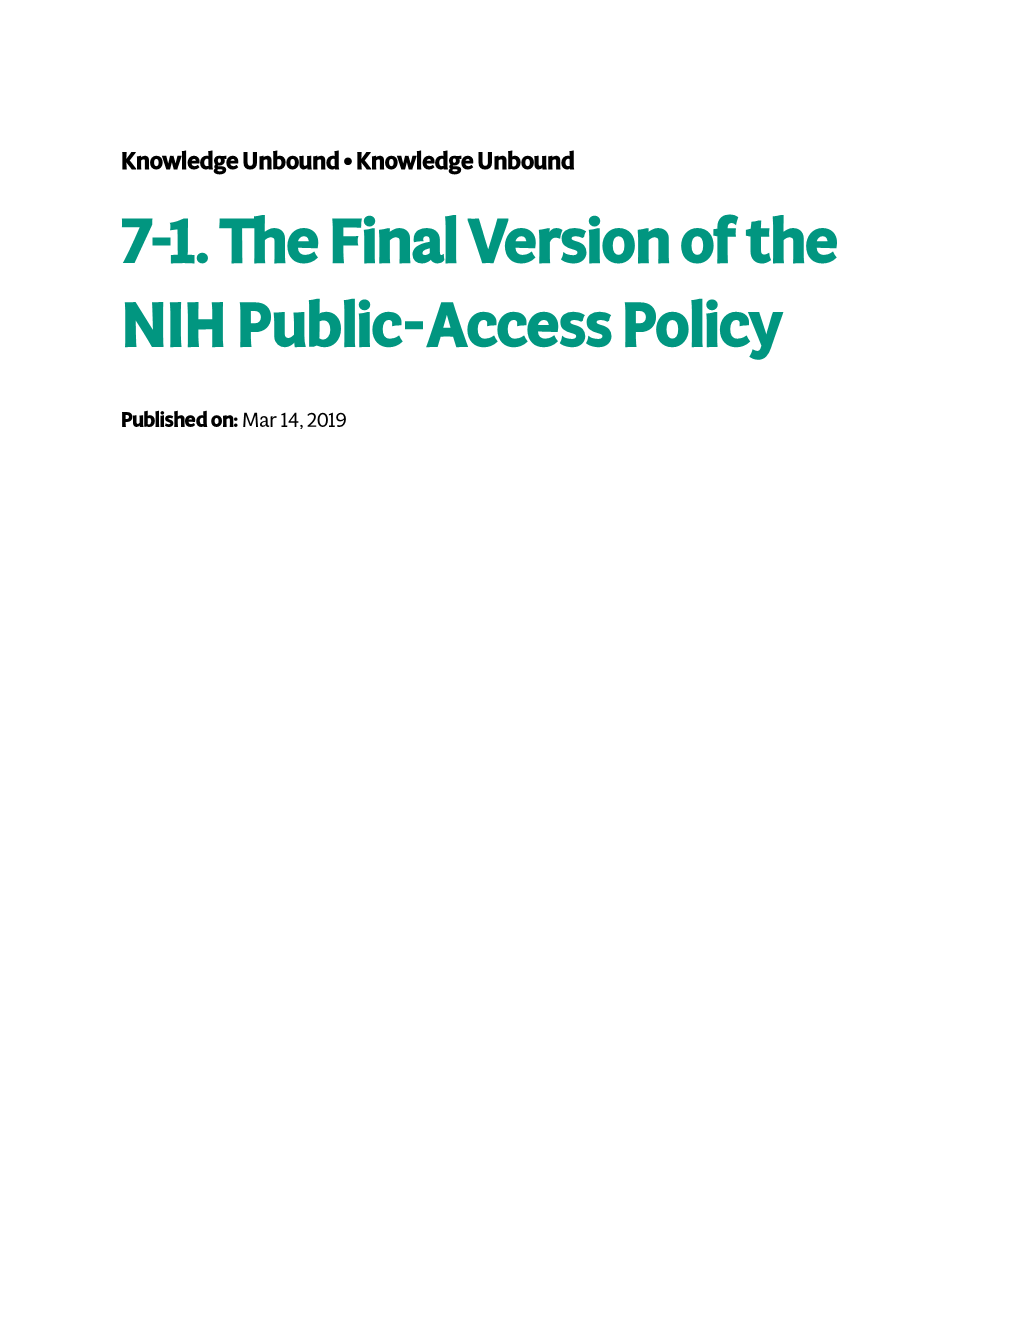 7-1. the Final Version of the NIH Public-Access Policy